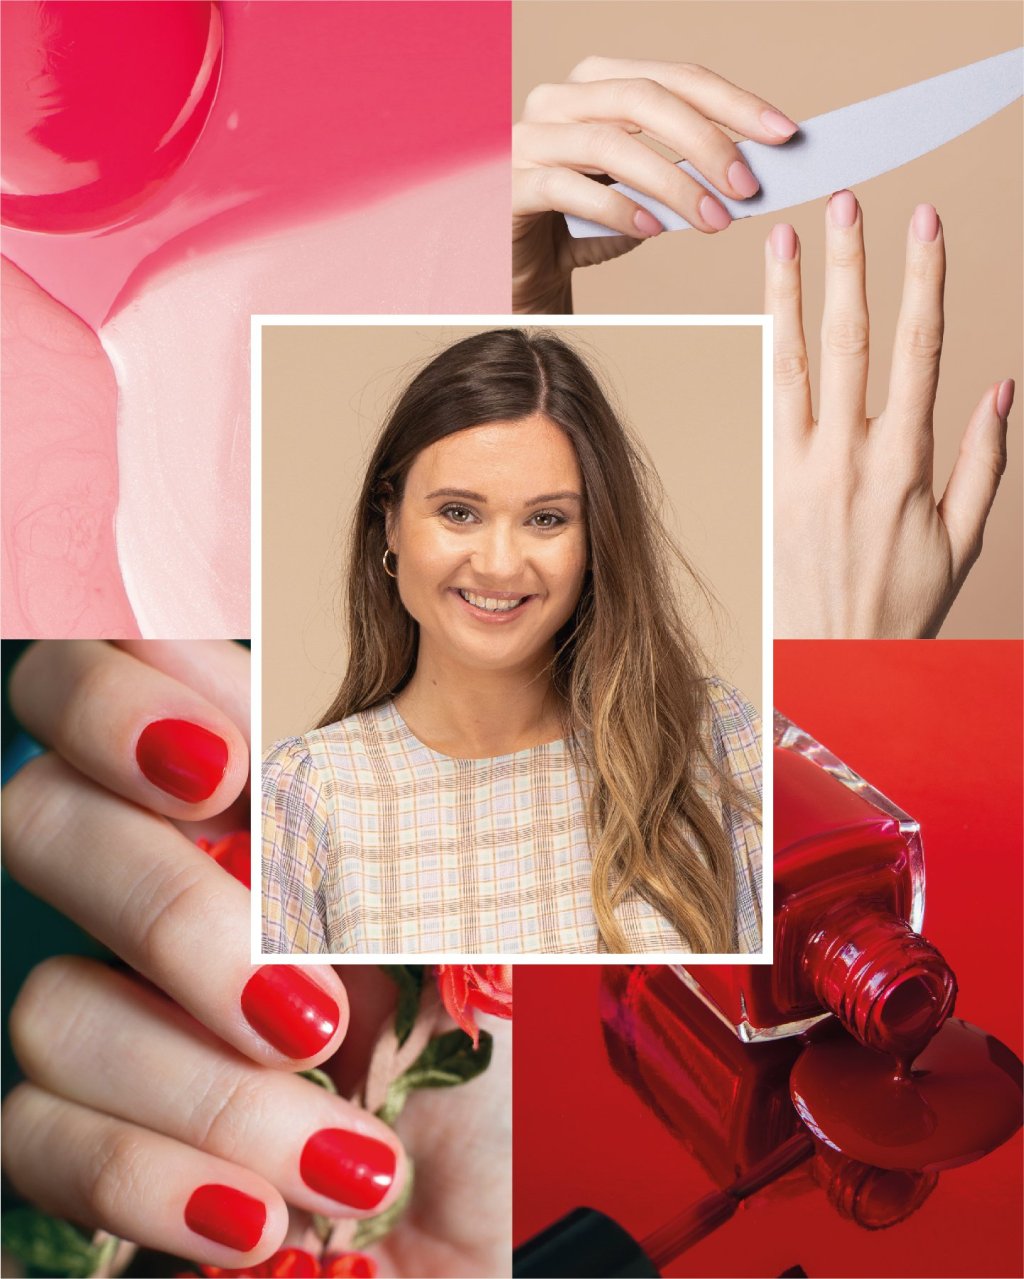 DIY Gel Nails: How To Do The Perfect Gel Nail Manicure At Home